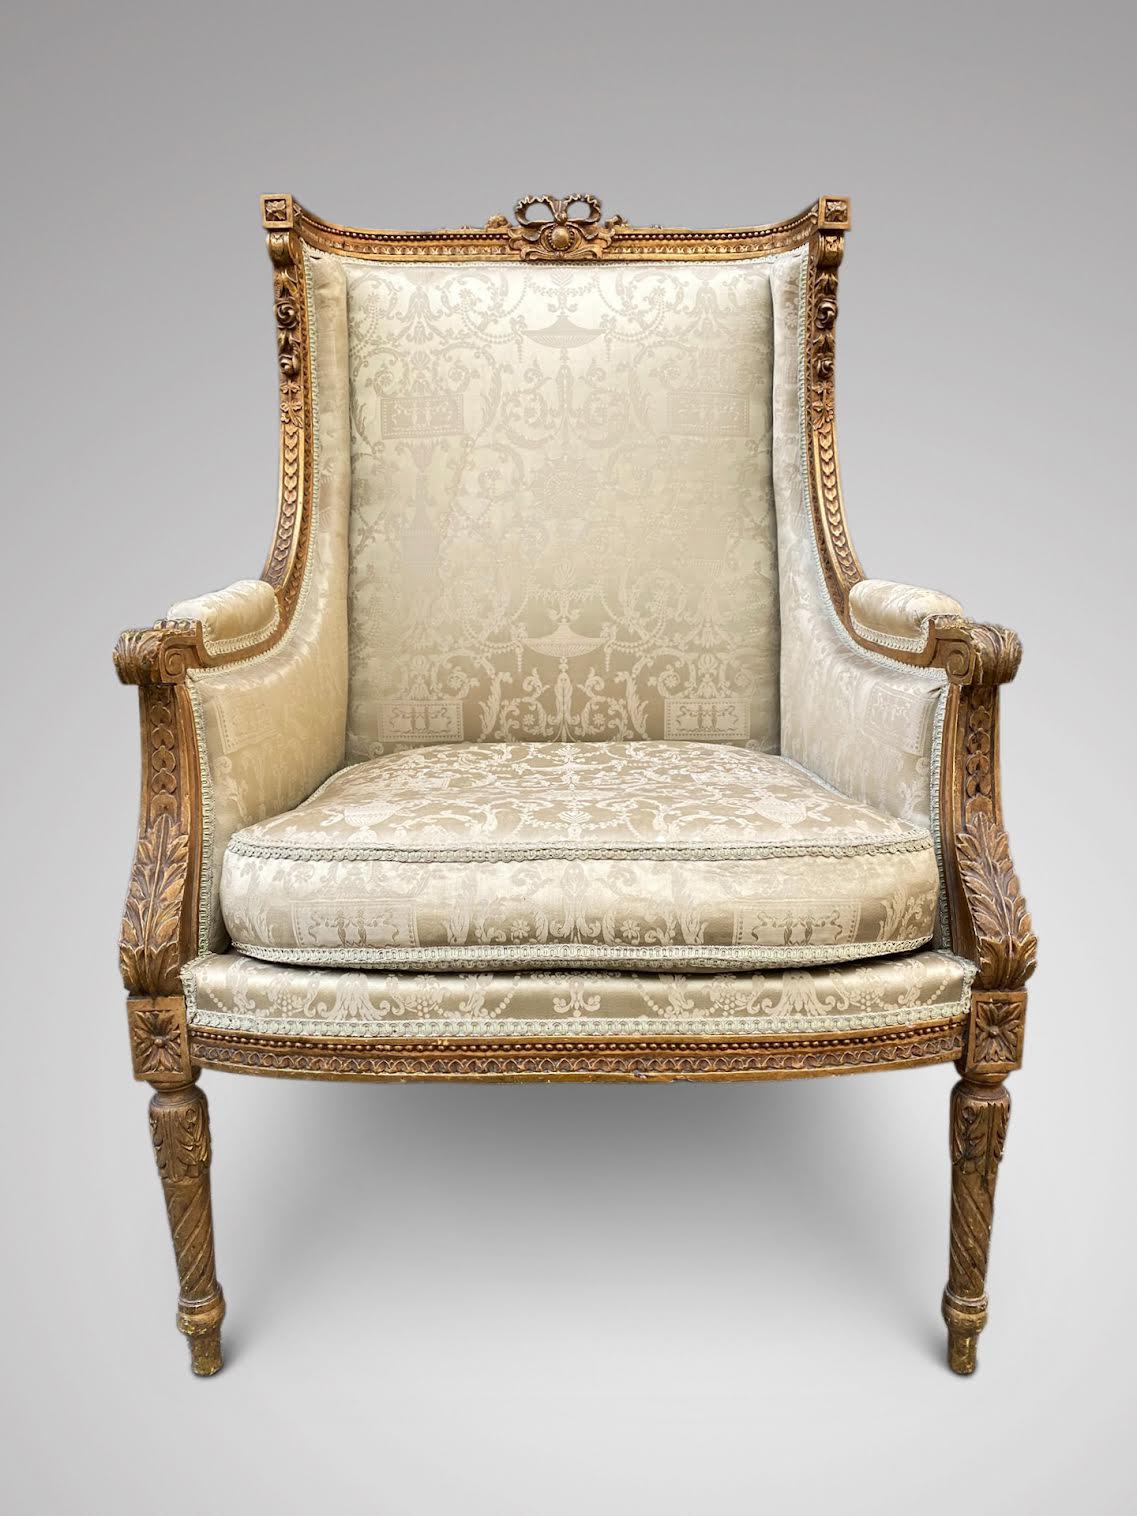 A late 19th century French Louis XVI Style gold gilt wood square back wingback bergère armchair. This chair has hand carved, acanthus and geometric accents with neoclassical details, florals and fluted legs in gilt wood finish with the original silk